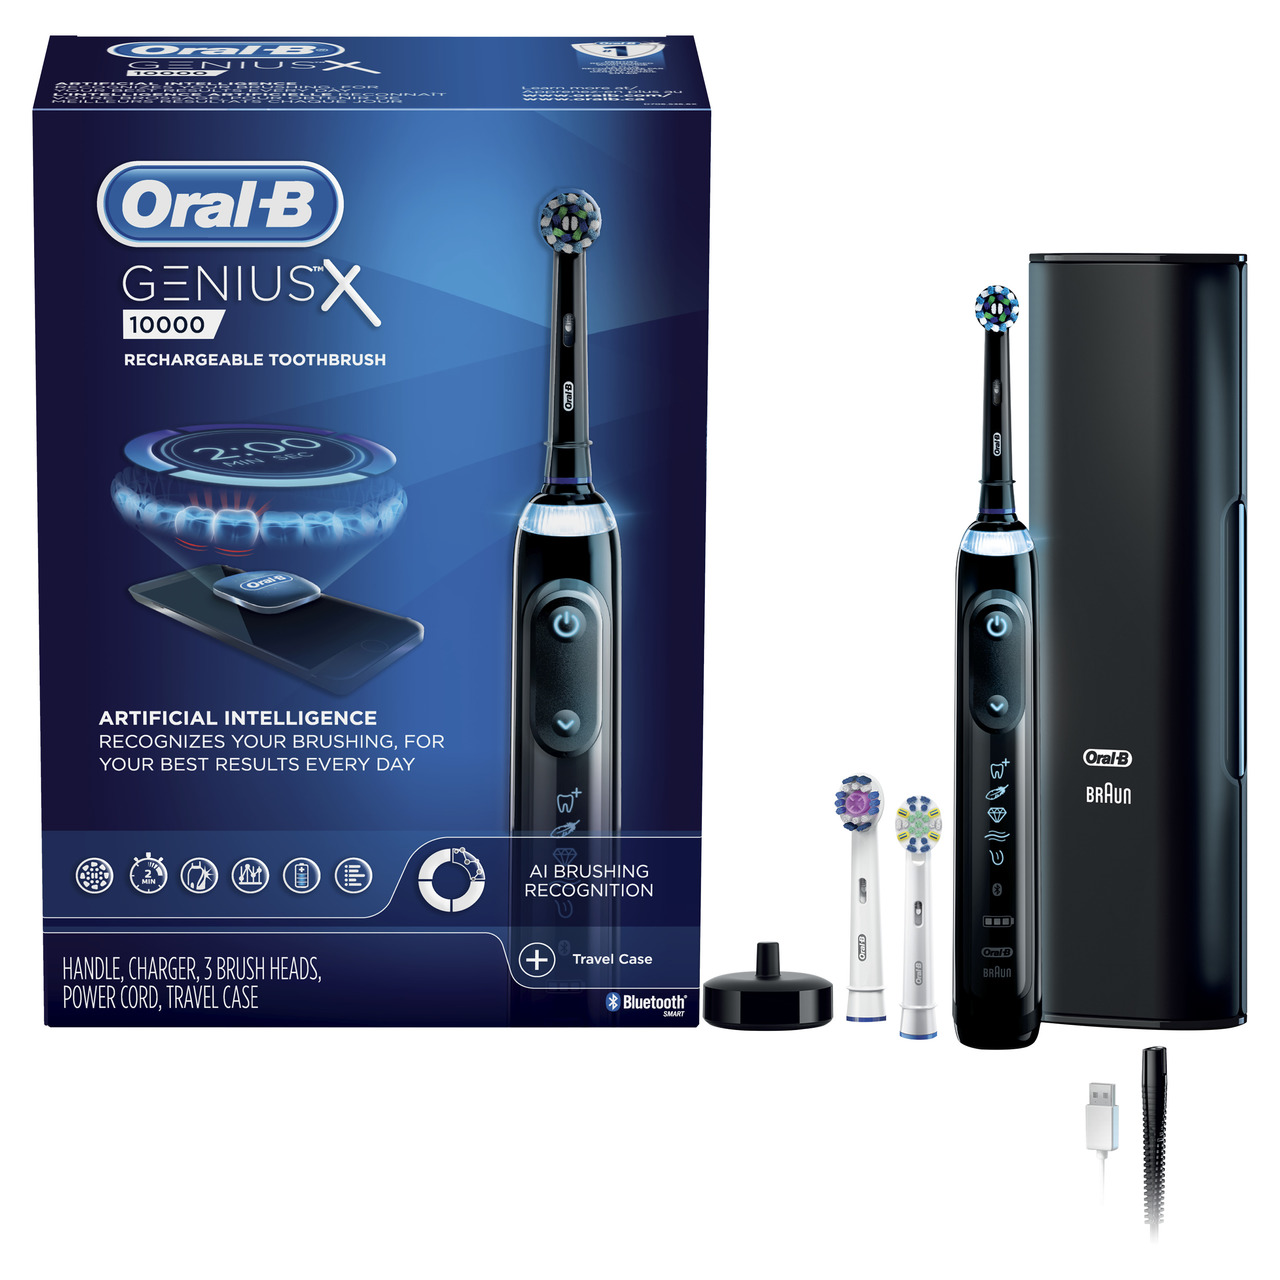 Oral-B Genius X 10000 Rechargeable Electric Toothbrush | Oral-B